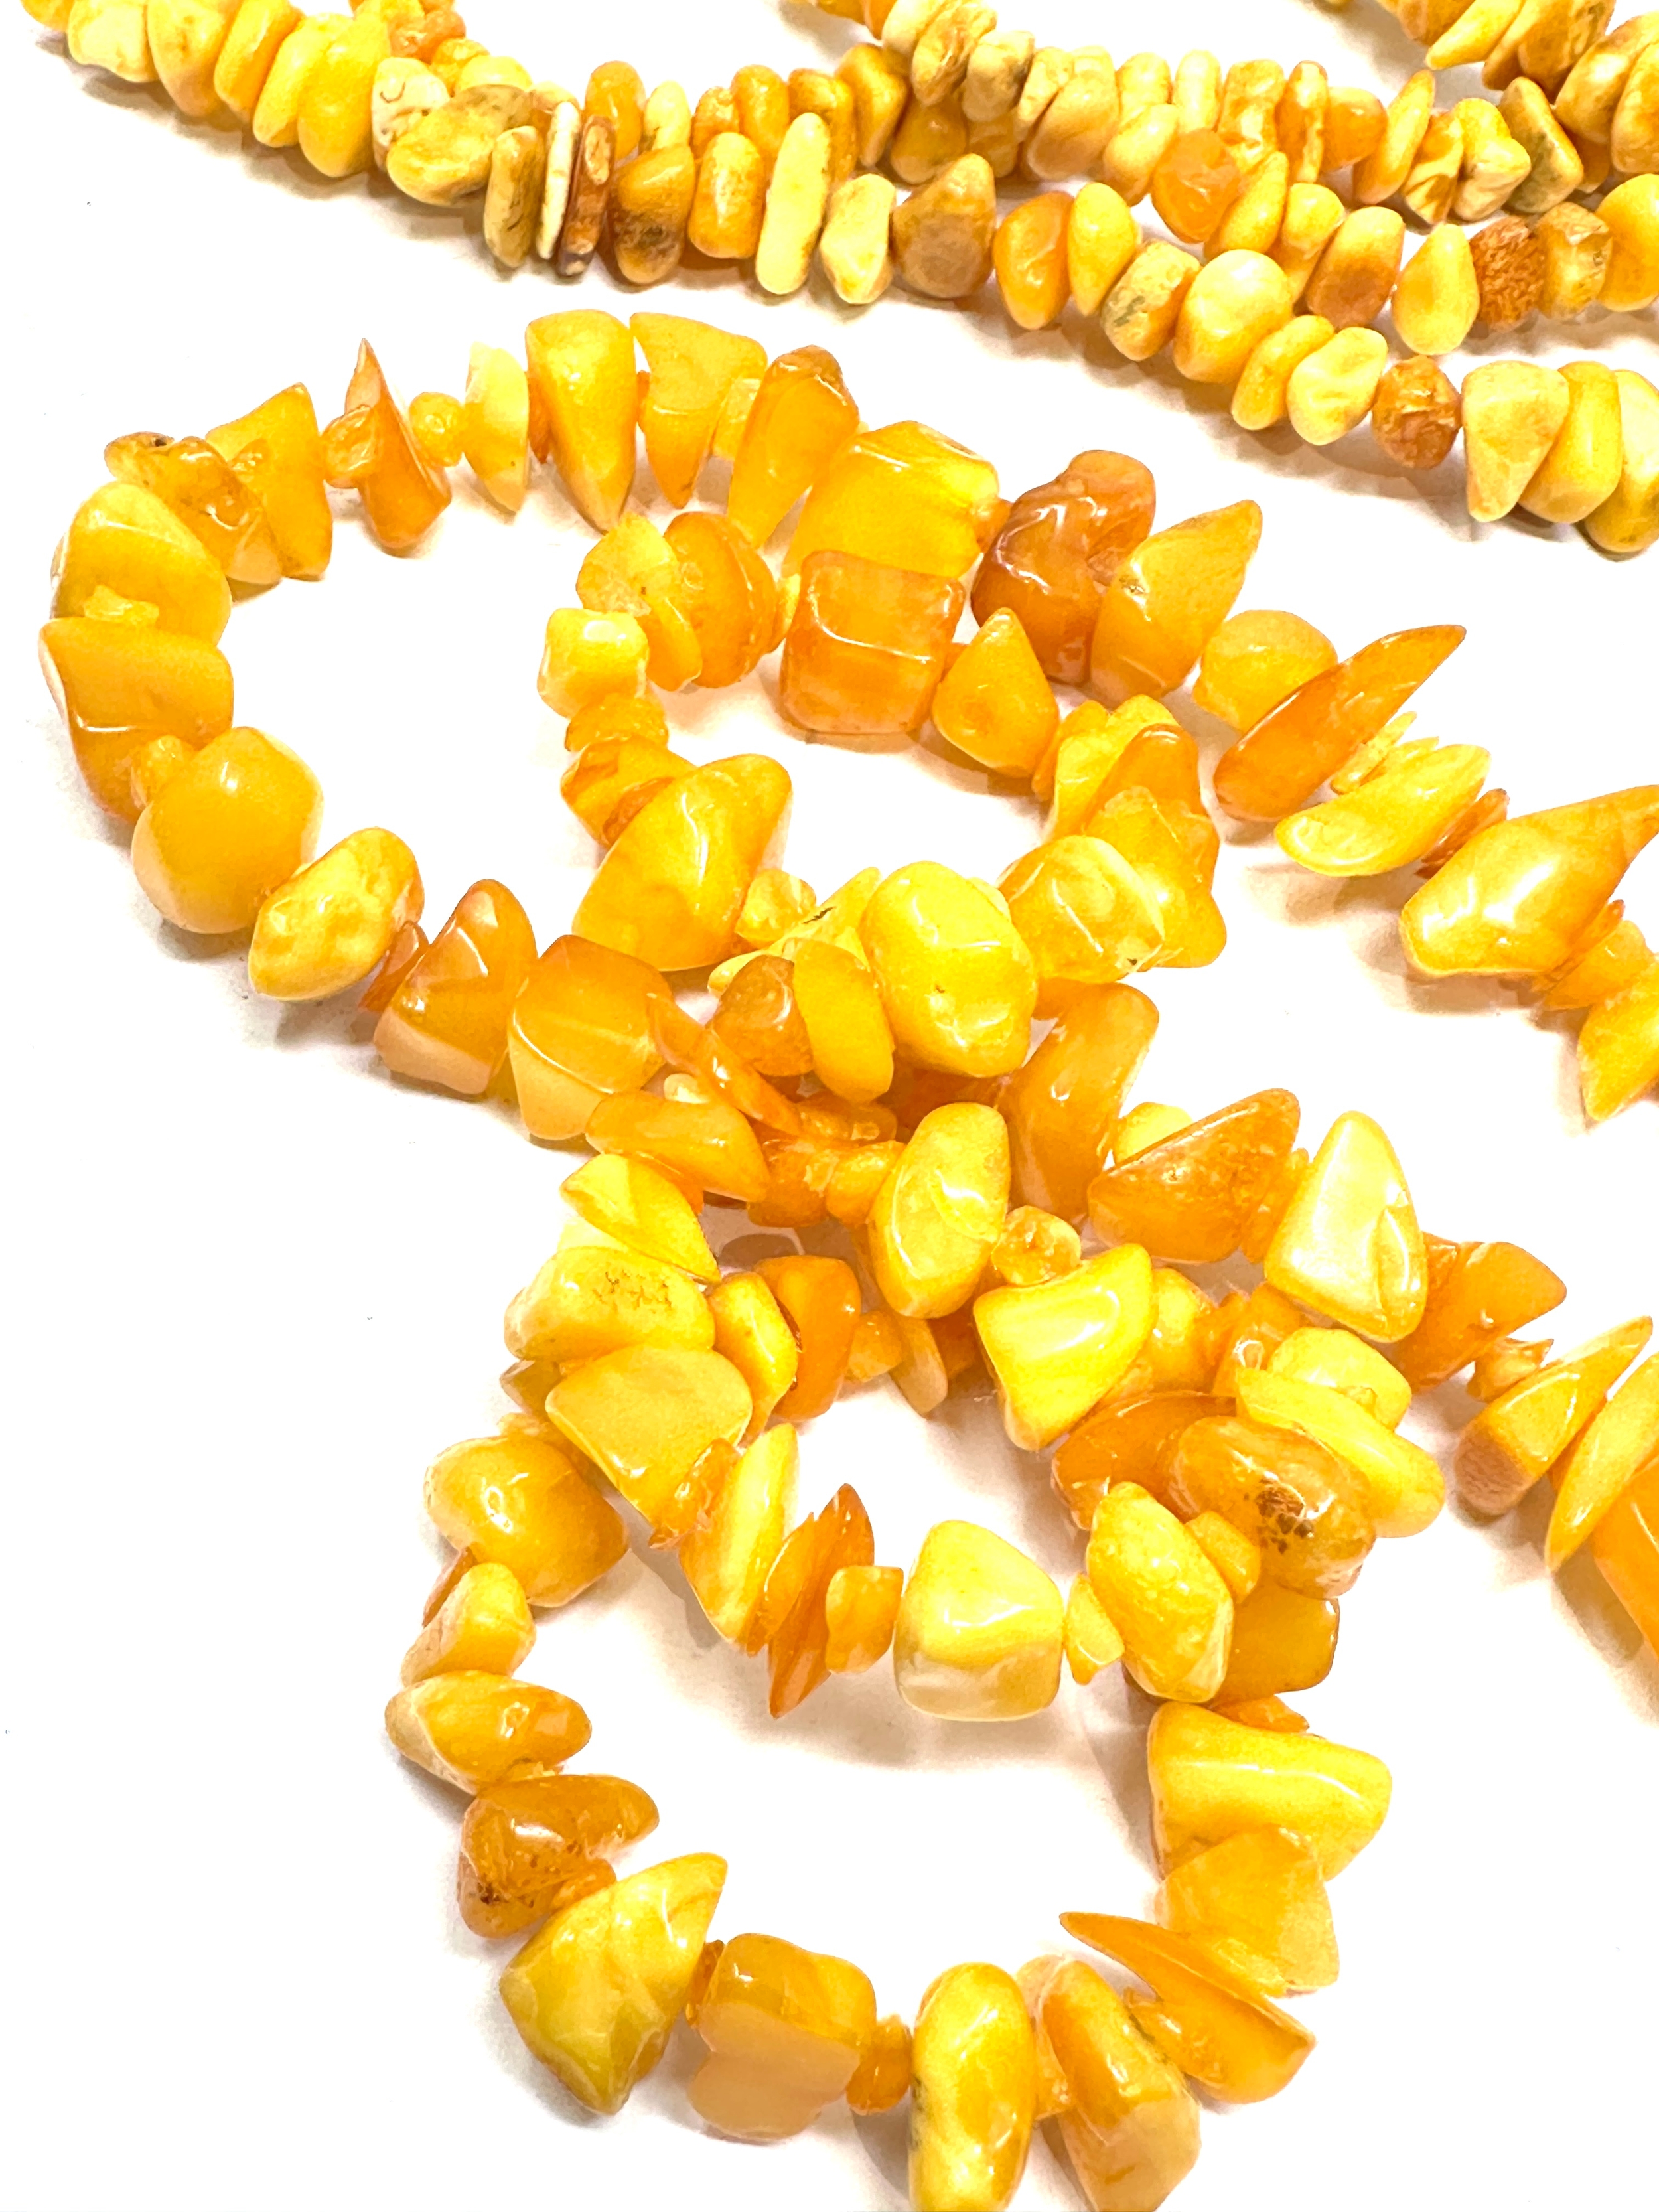 Amber jewellery necklaces weight 110g - Image 2 of 3